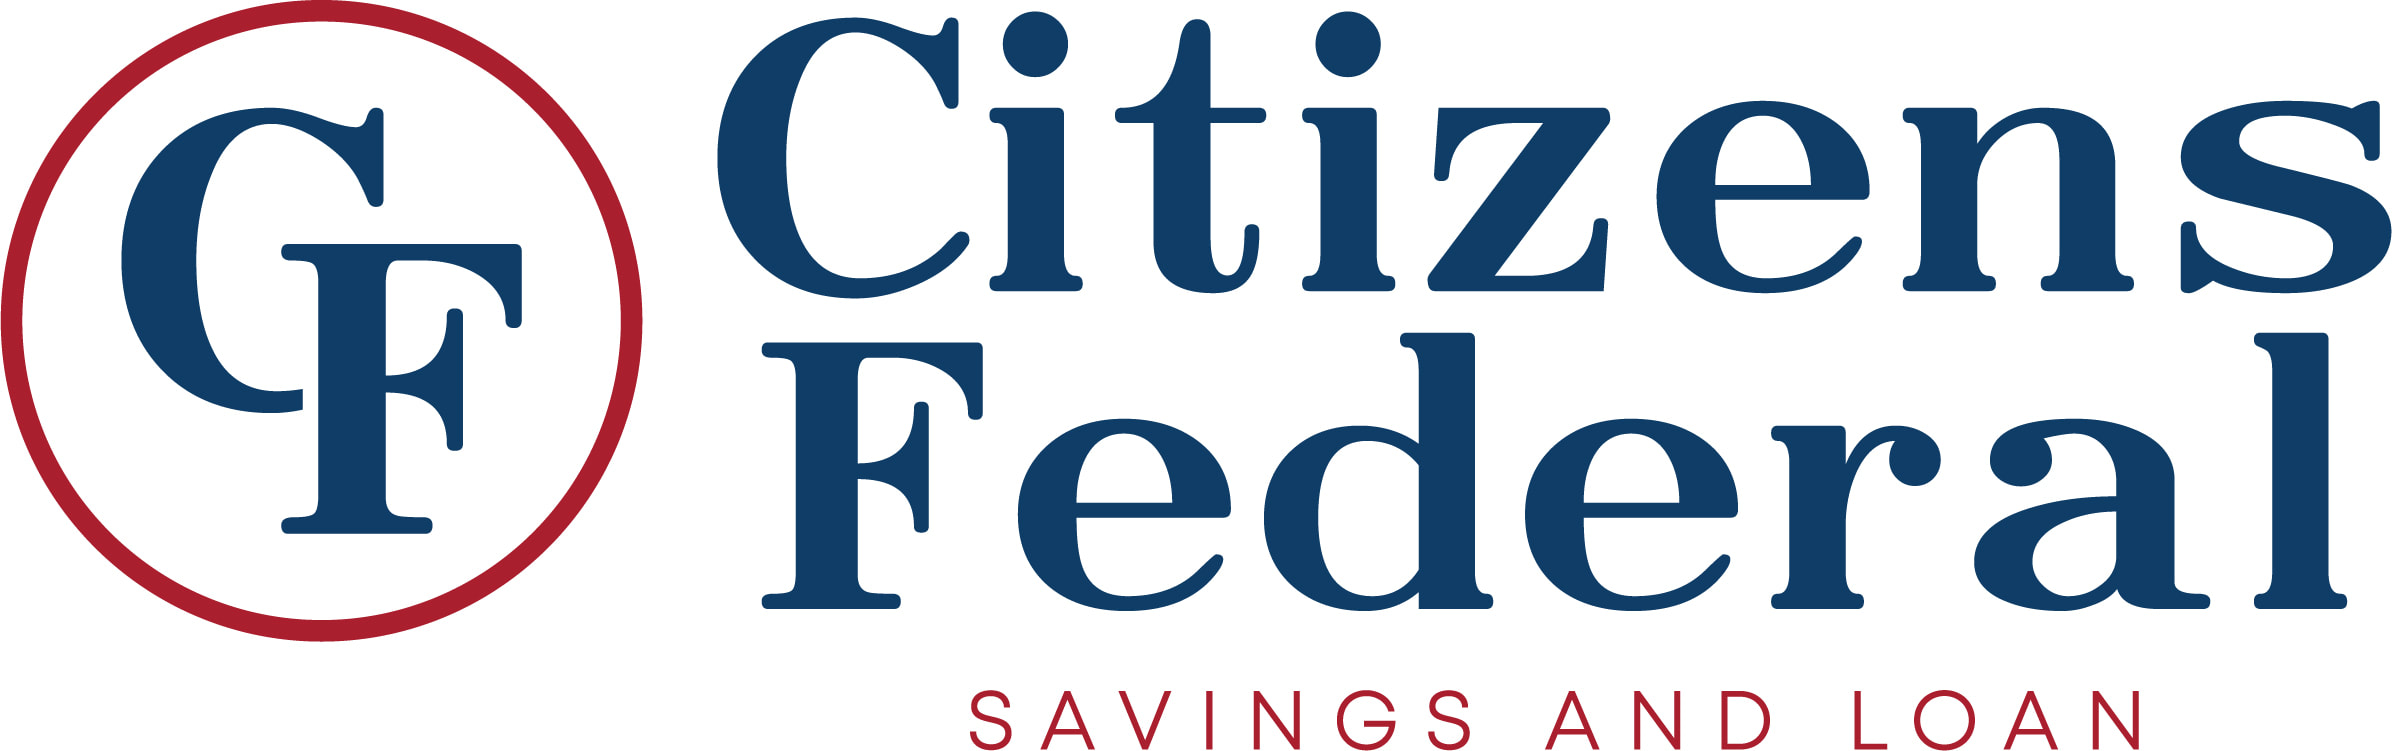 Citizens Federal Savings and Loan Logo